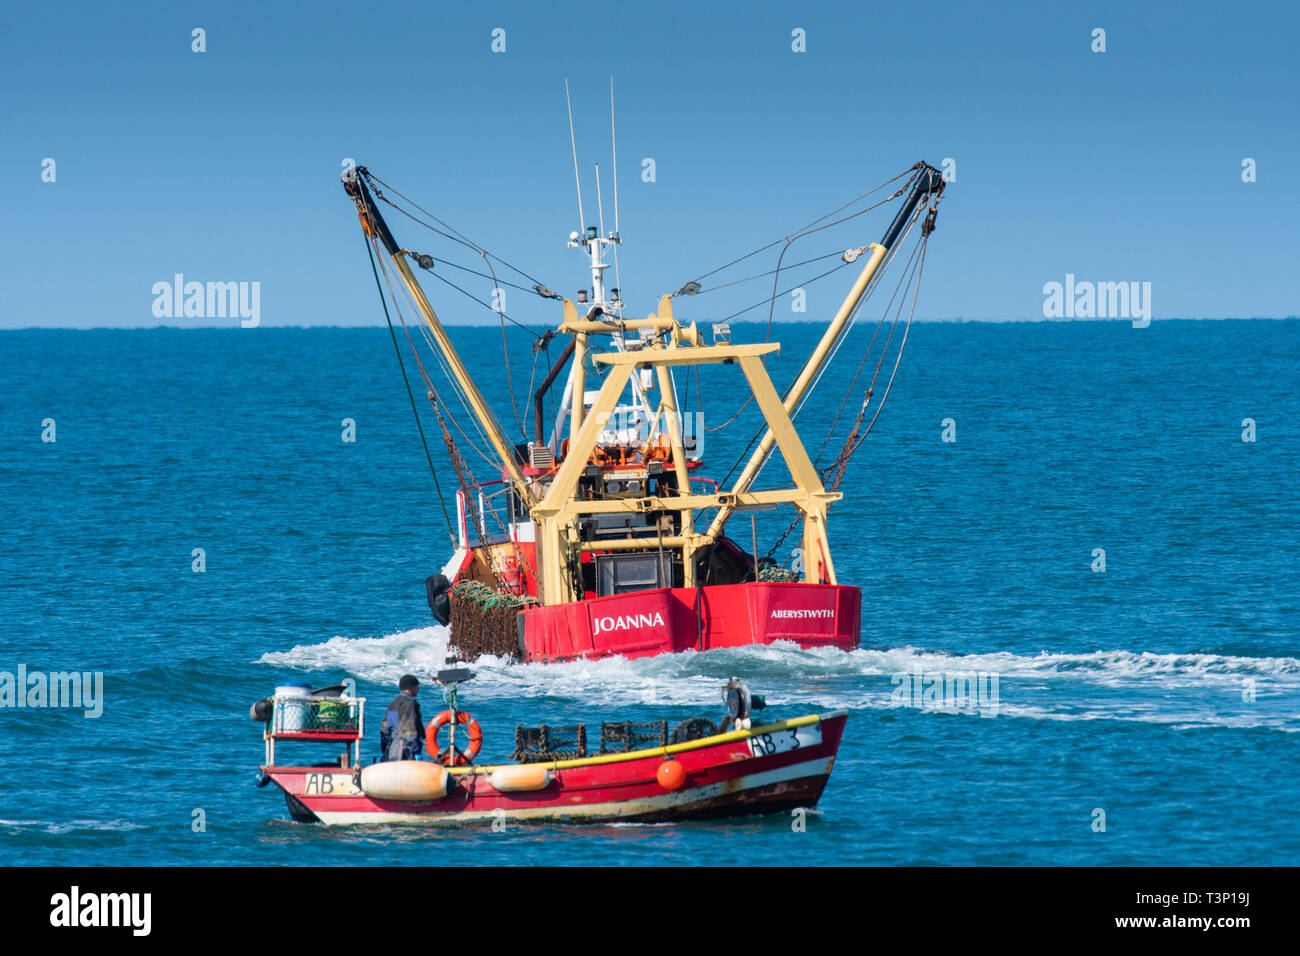 Aberystwyth Wales, UK. 11th Apr, 2019. UK Weather: Local inshore fishermen out in their small boats on the calm sea on a gloriously bright and sunny morning in Aberystwyth on the Cardigan Bay coast of west Wales.  Credit: keith morris/Alamy Live News Stock Photo